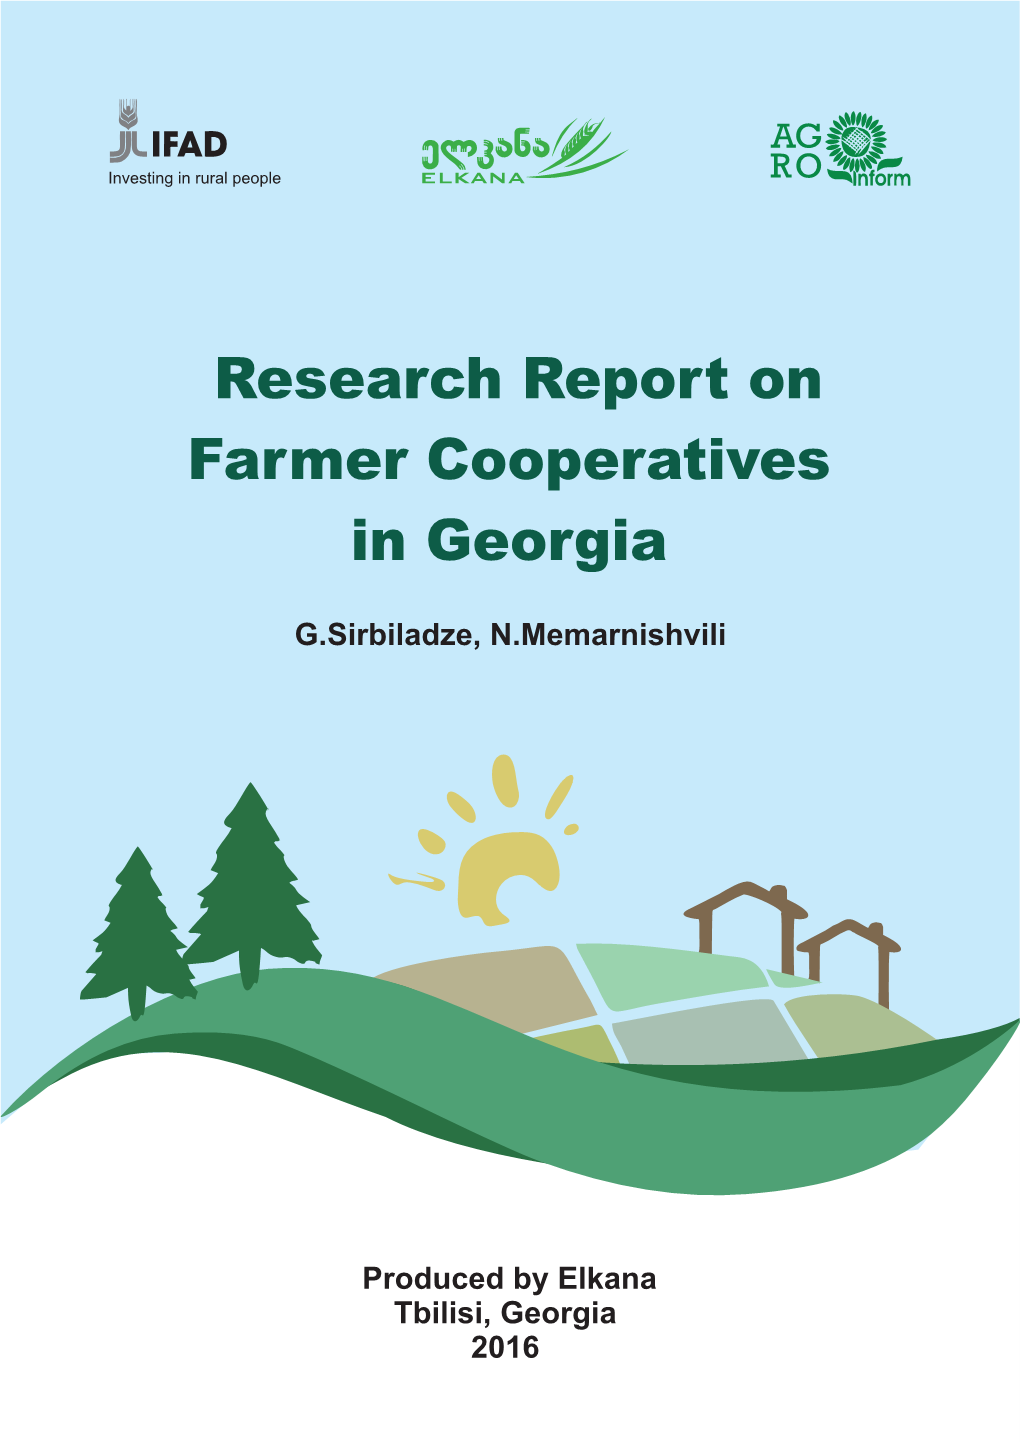 Research Report on Farmer Cooperatives in Georgia